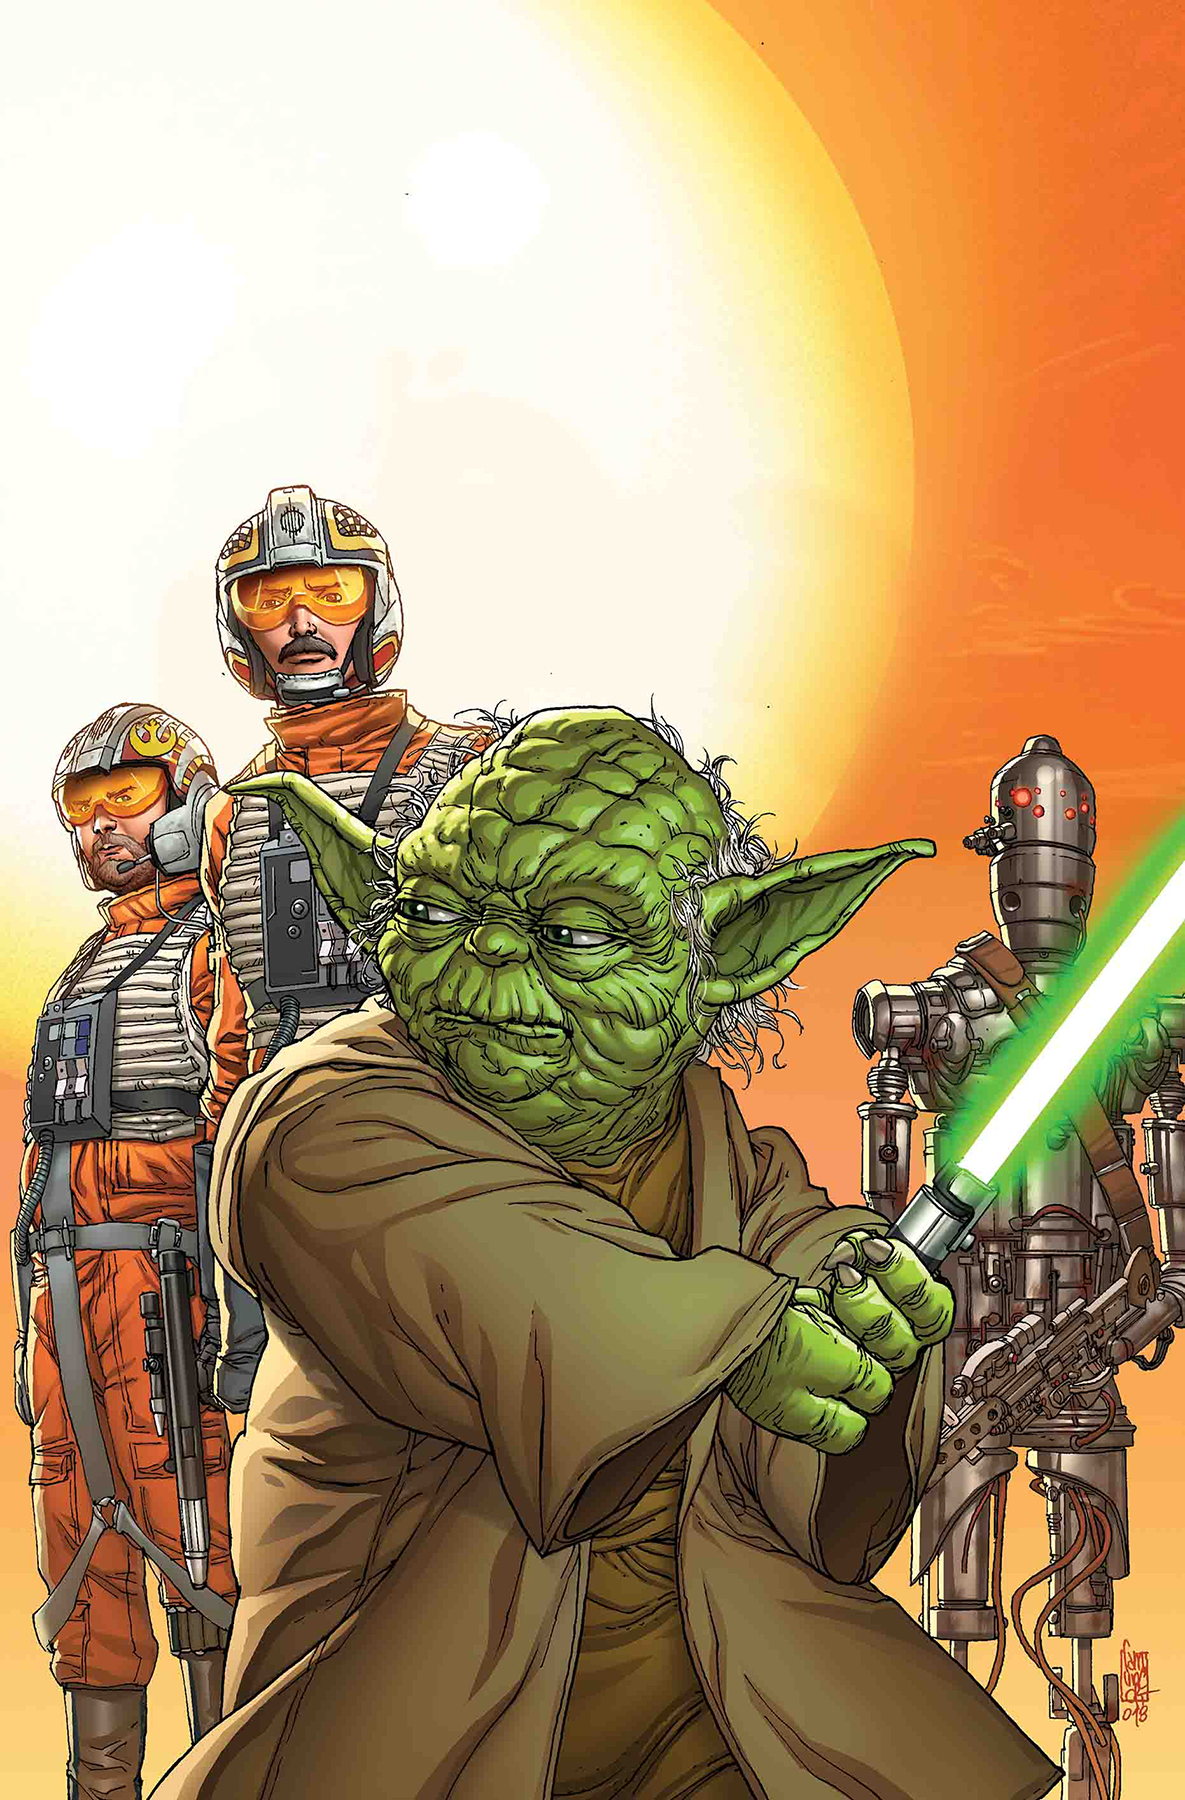 STAR WARS AGE REBELLION SPECIAL #1